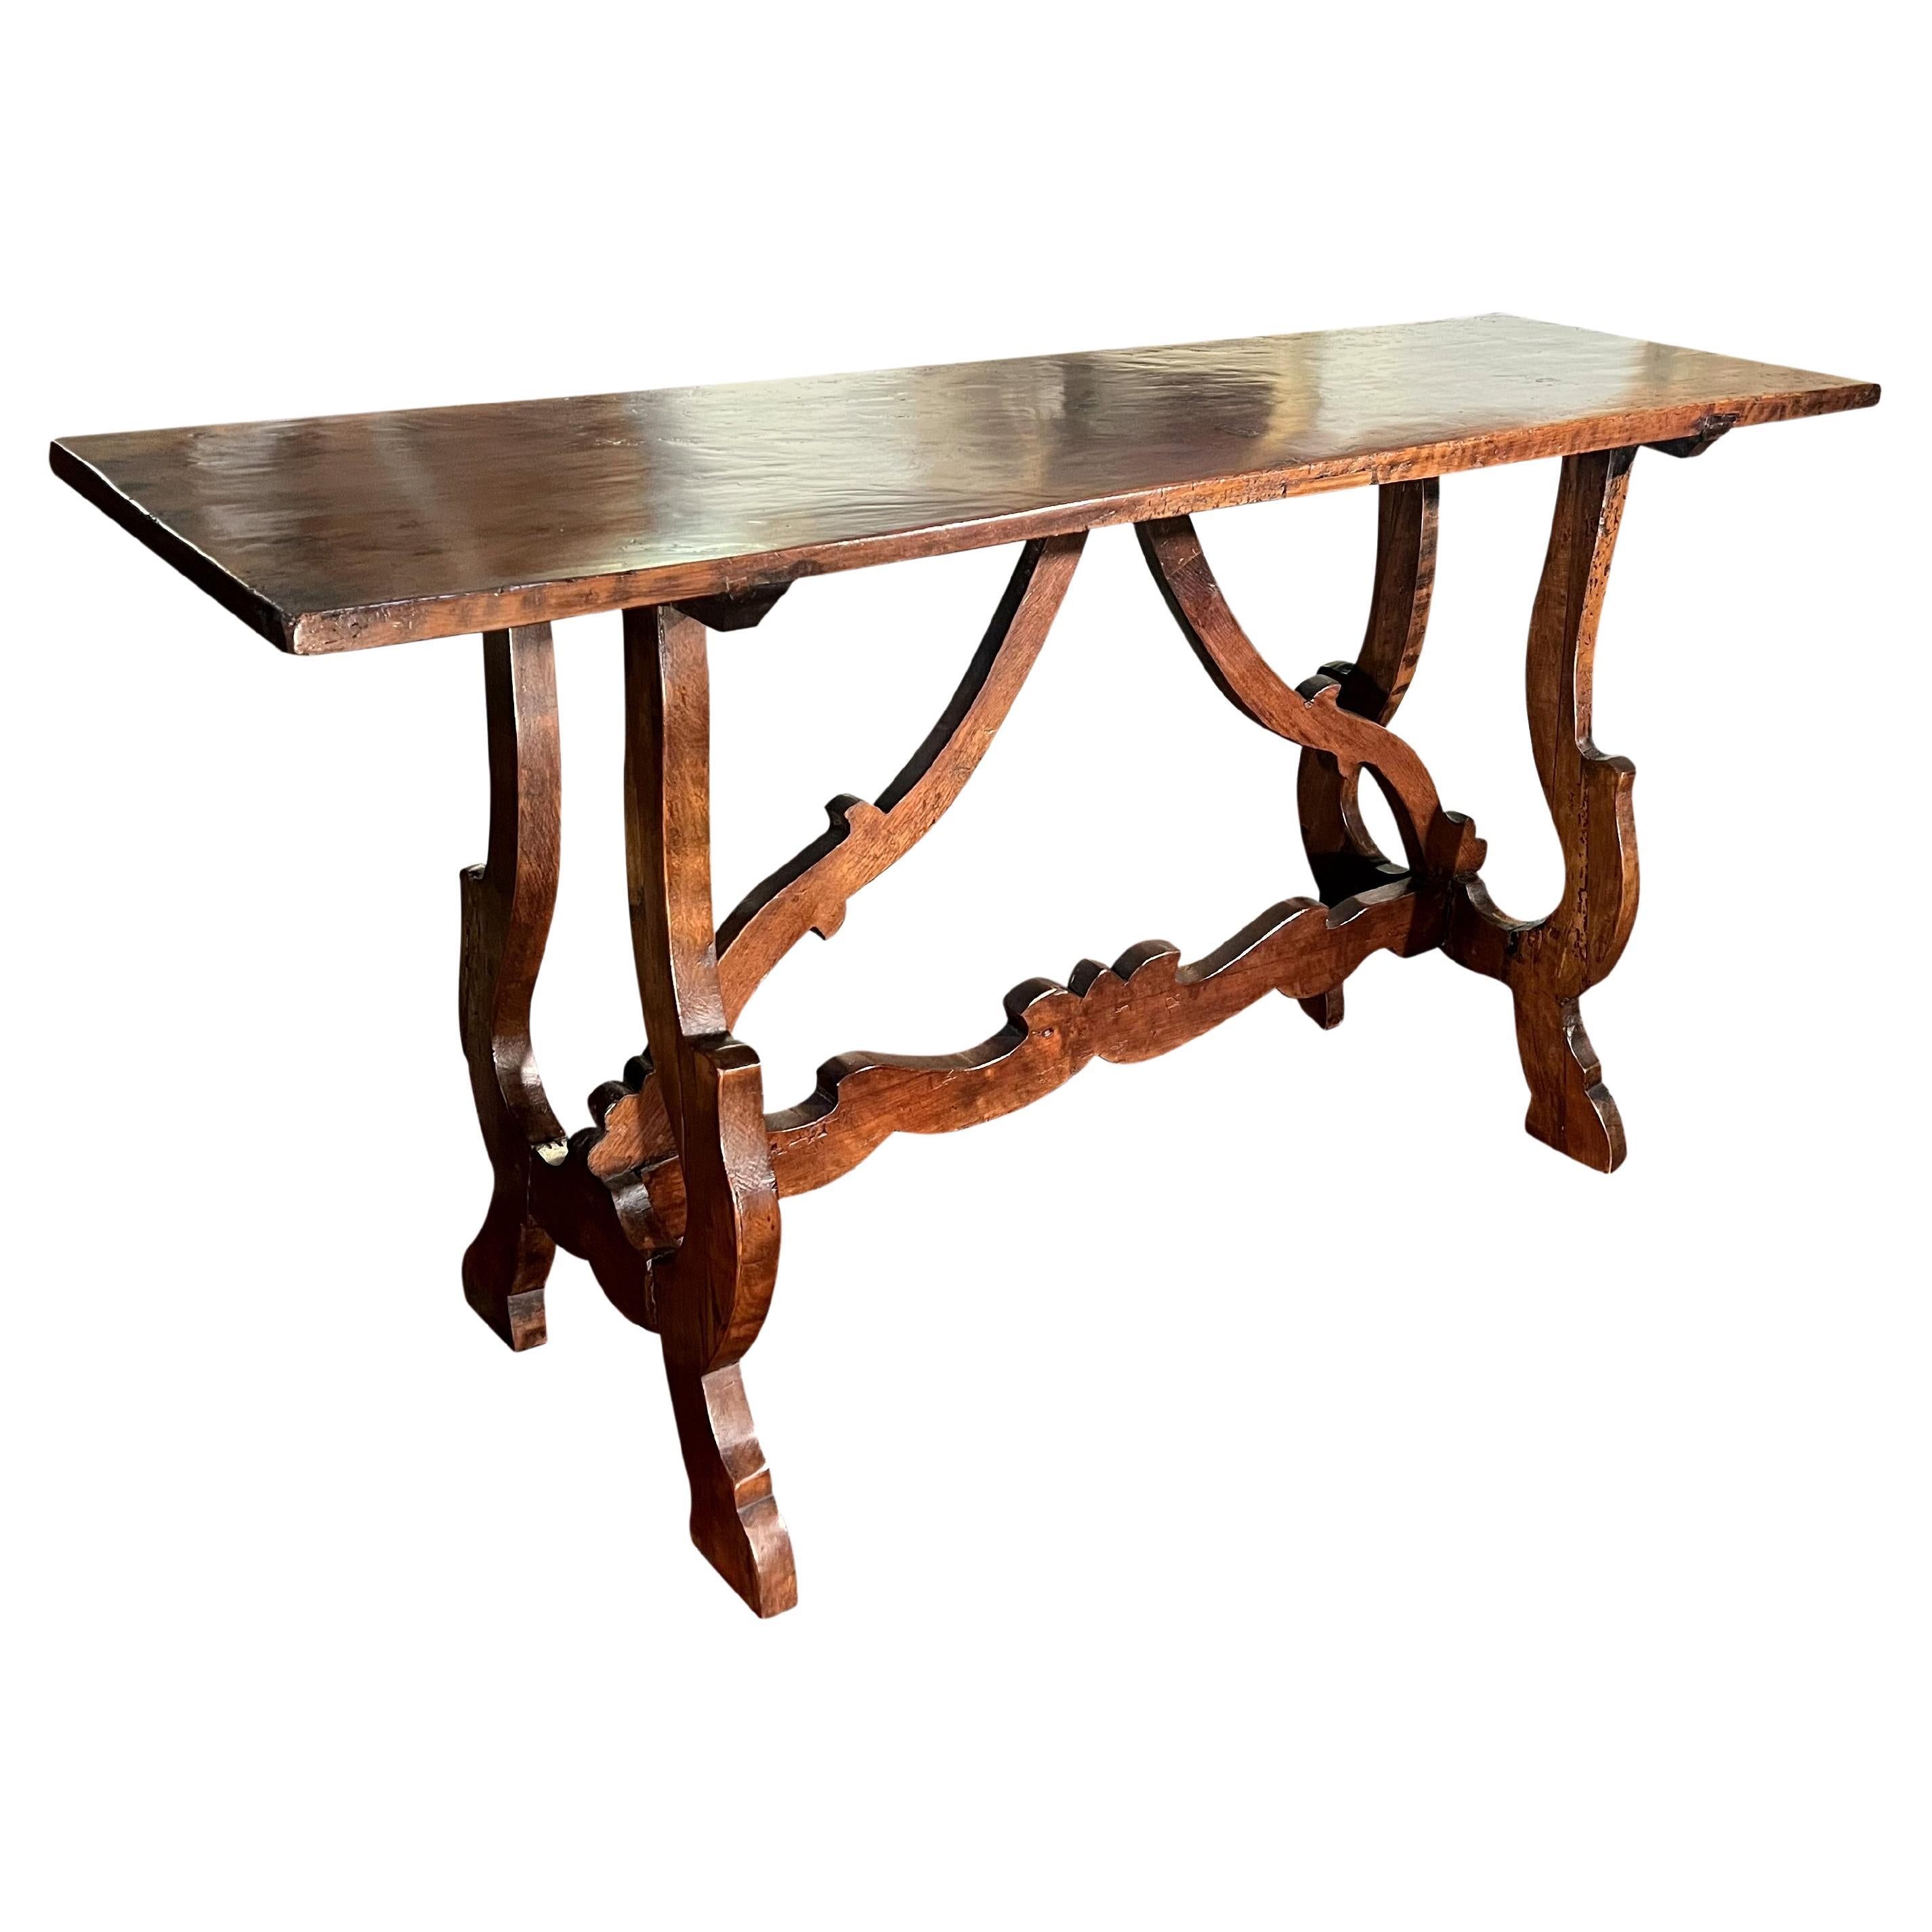  Italian 18th Century Tuscan Fratino Table with Lyre legs. For Sale